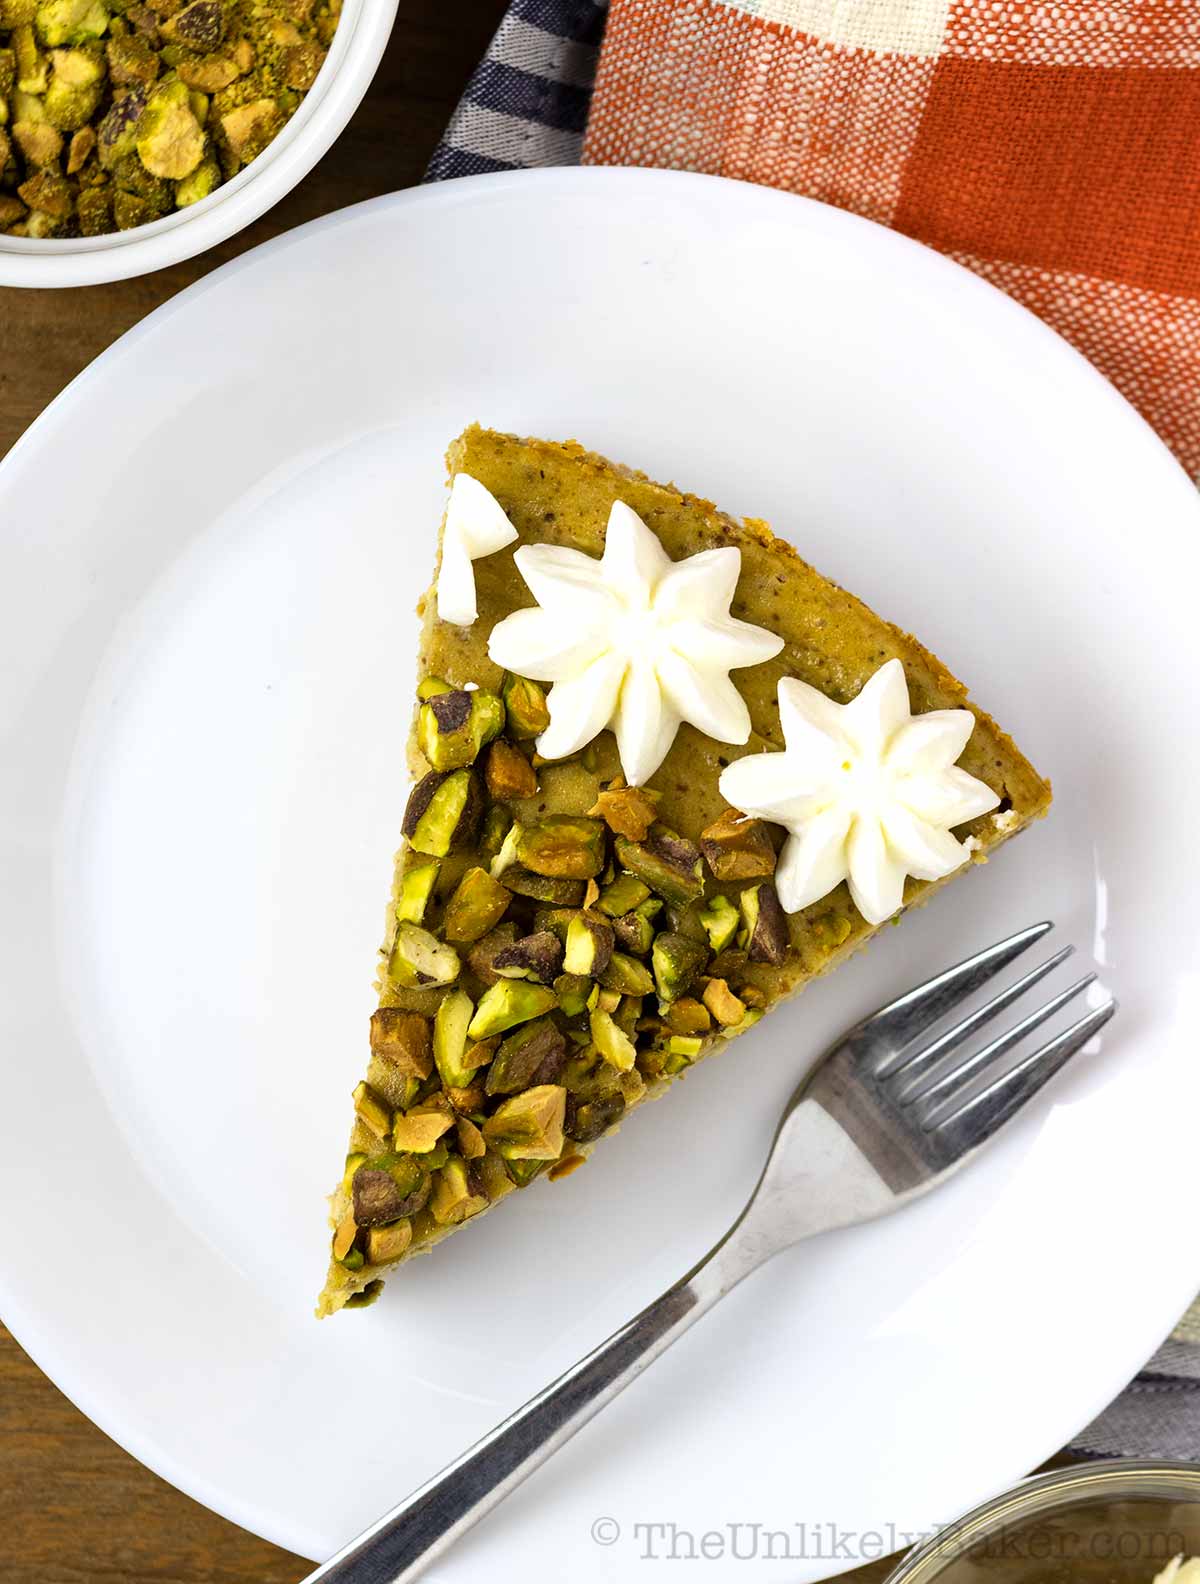 Slice of cheesecake with pistachios and whipped cream on a plate.